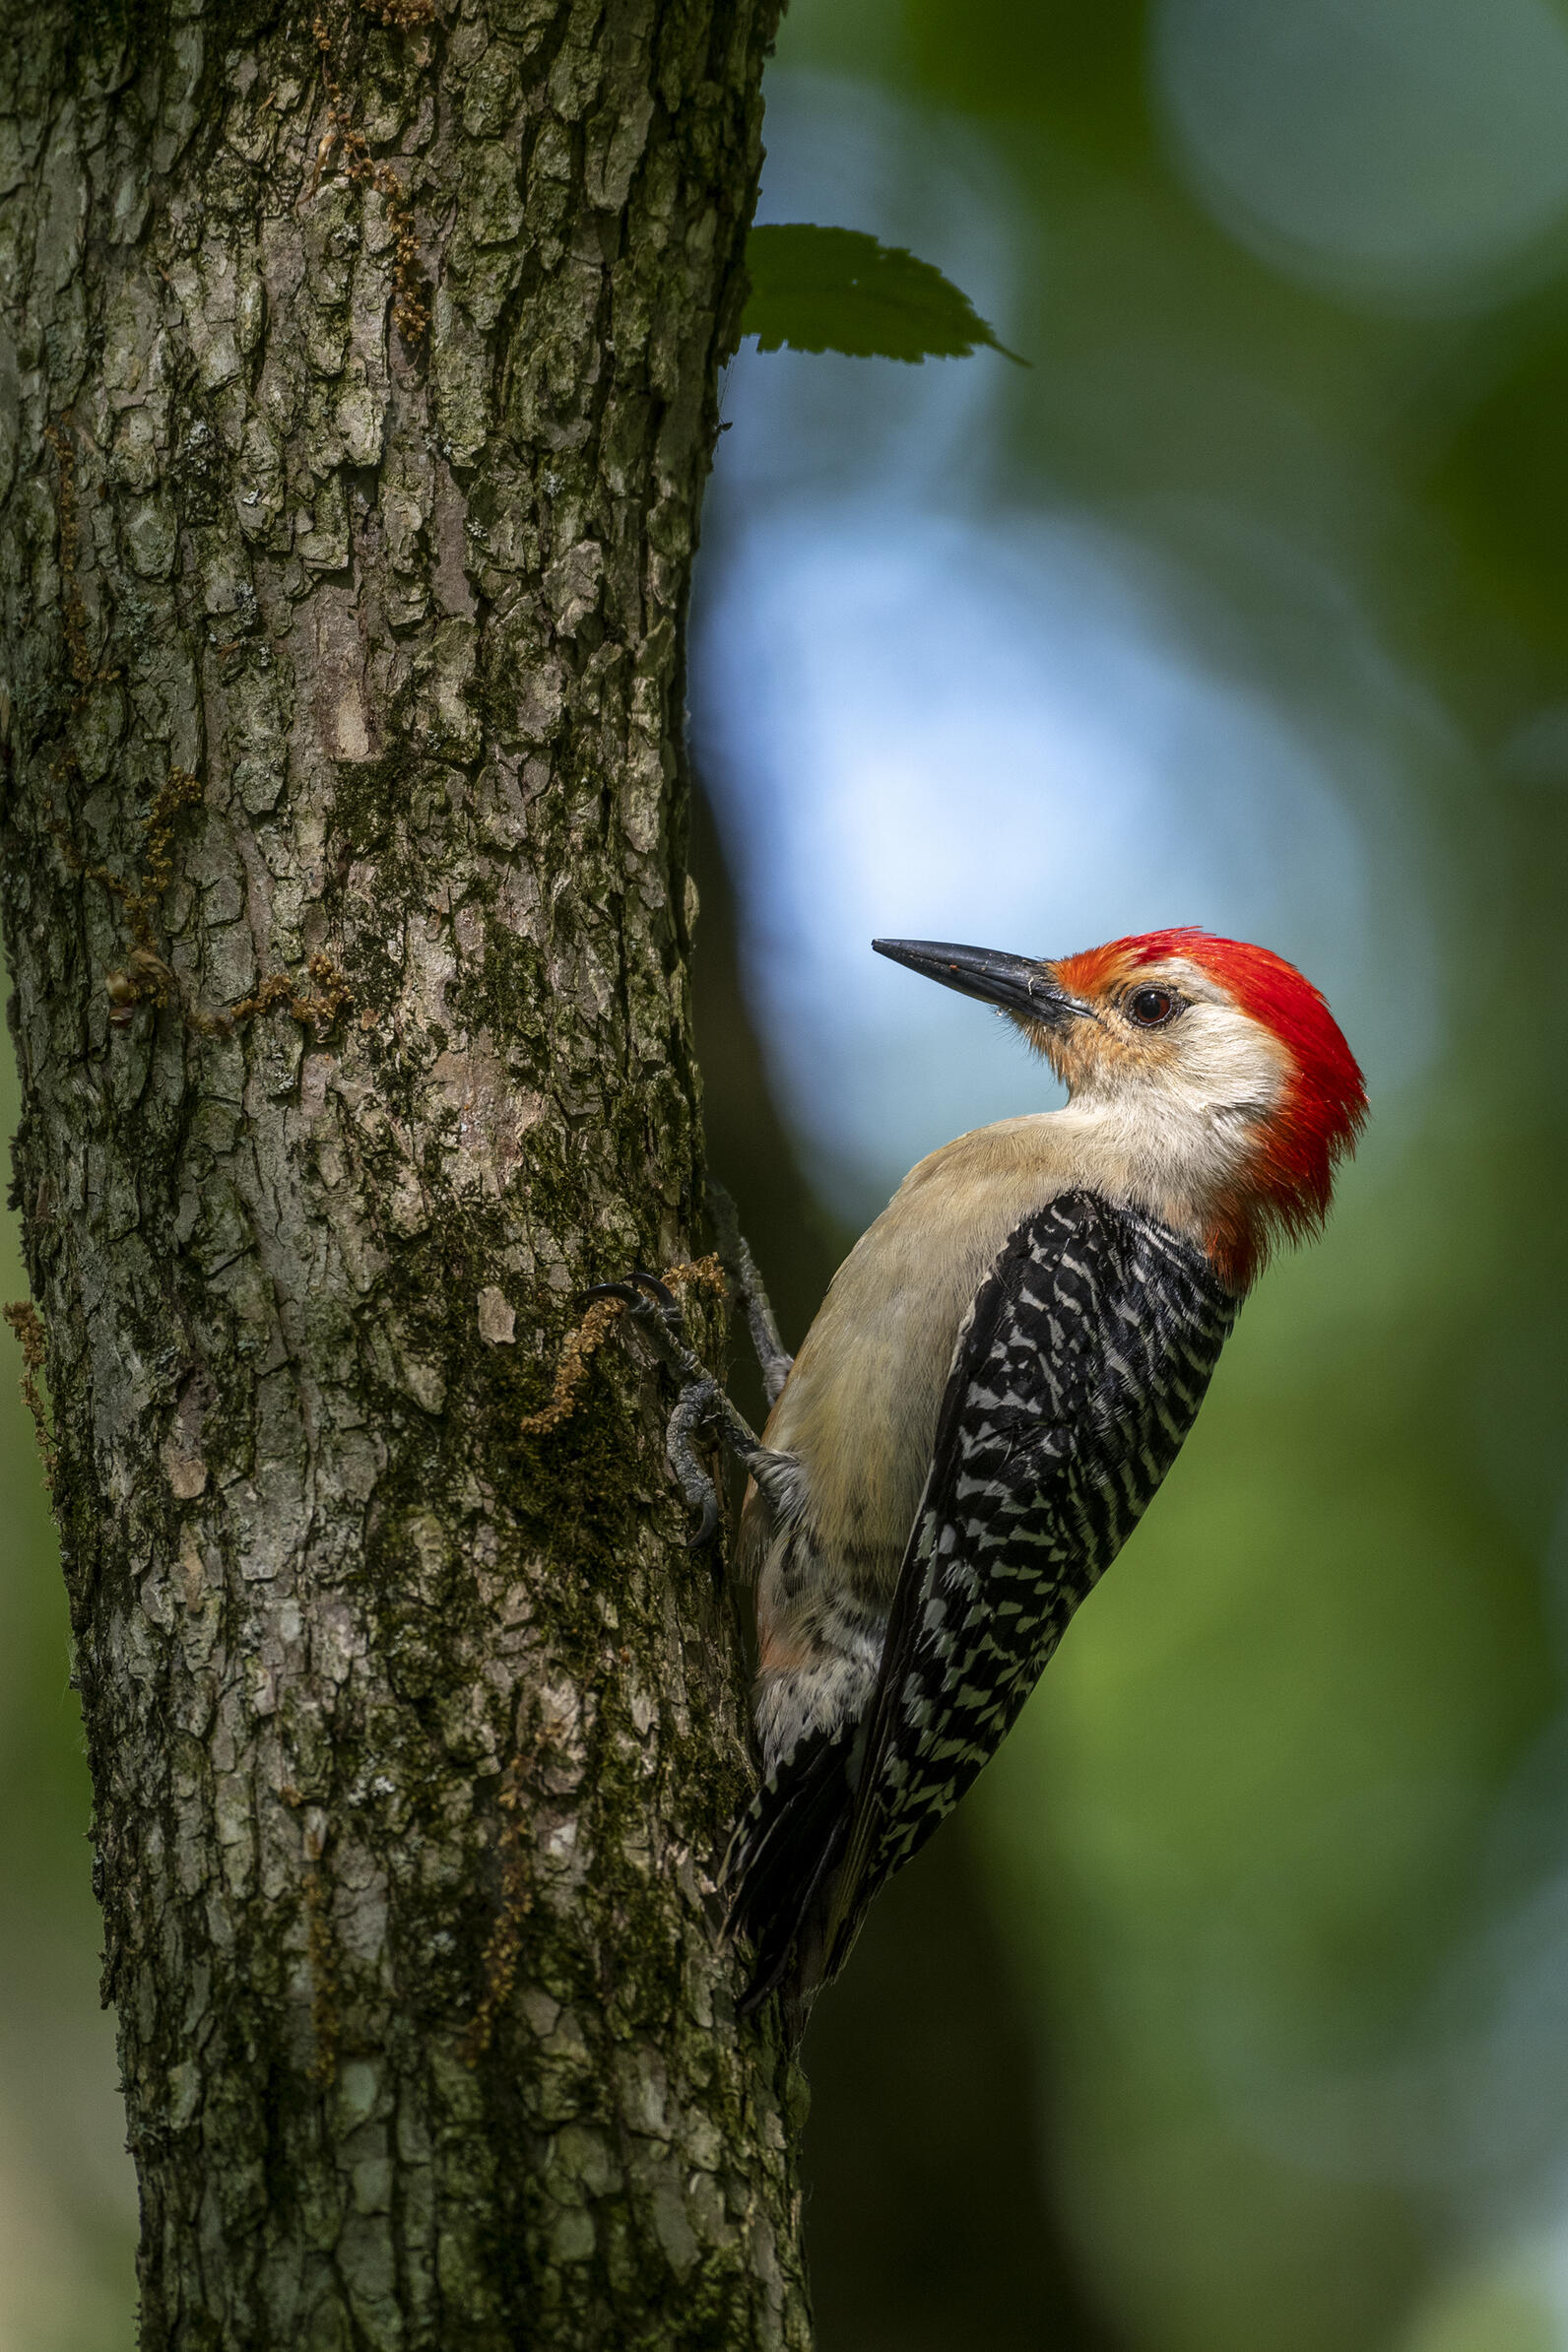 A Red-bellied Woodpecker clings to the side of a tree.